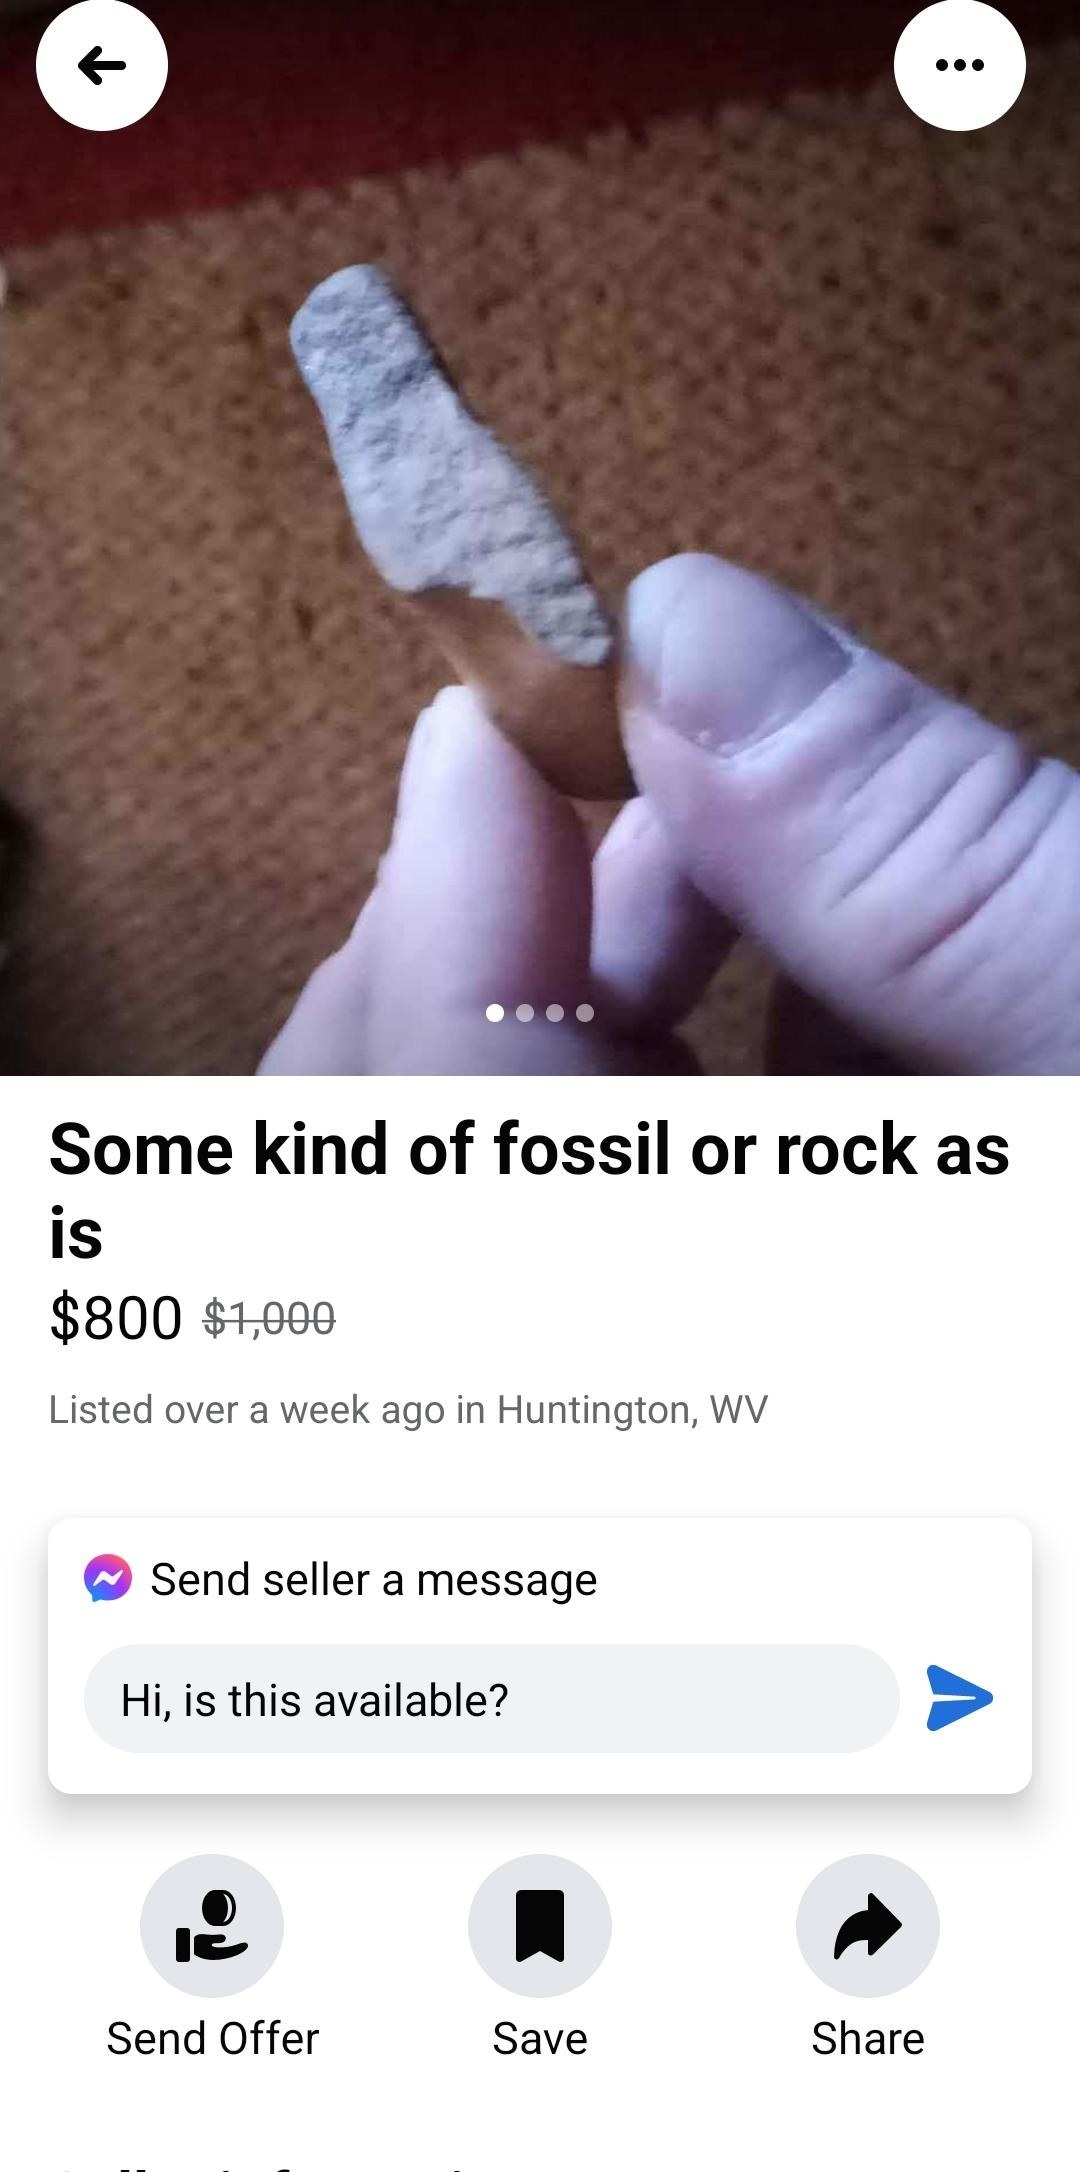 Tiny rock being sold as a fossil for $800, down from $1,000